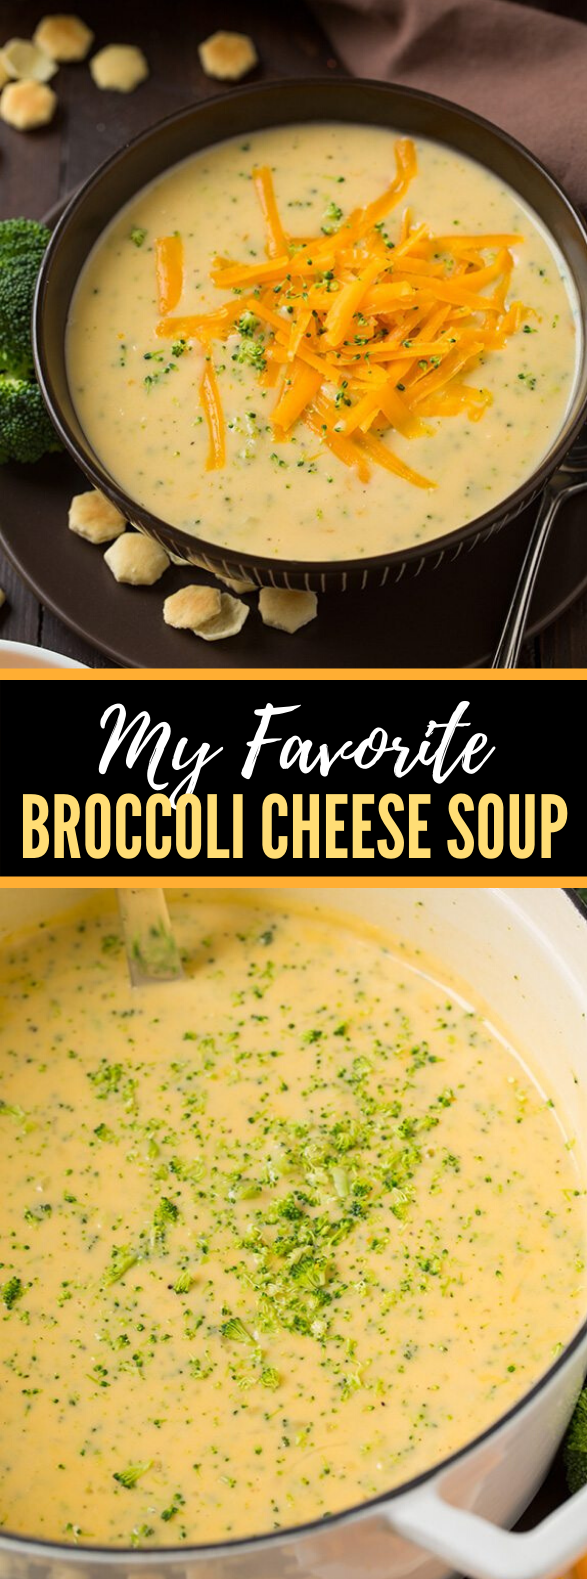 My Favorite Broccoli Cheese Soup #comfortfood #delicious